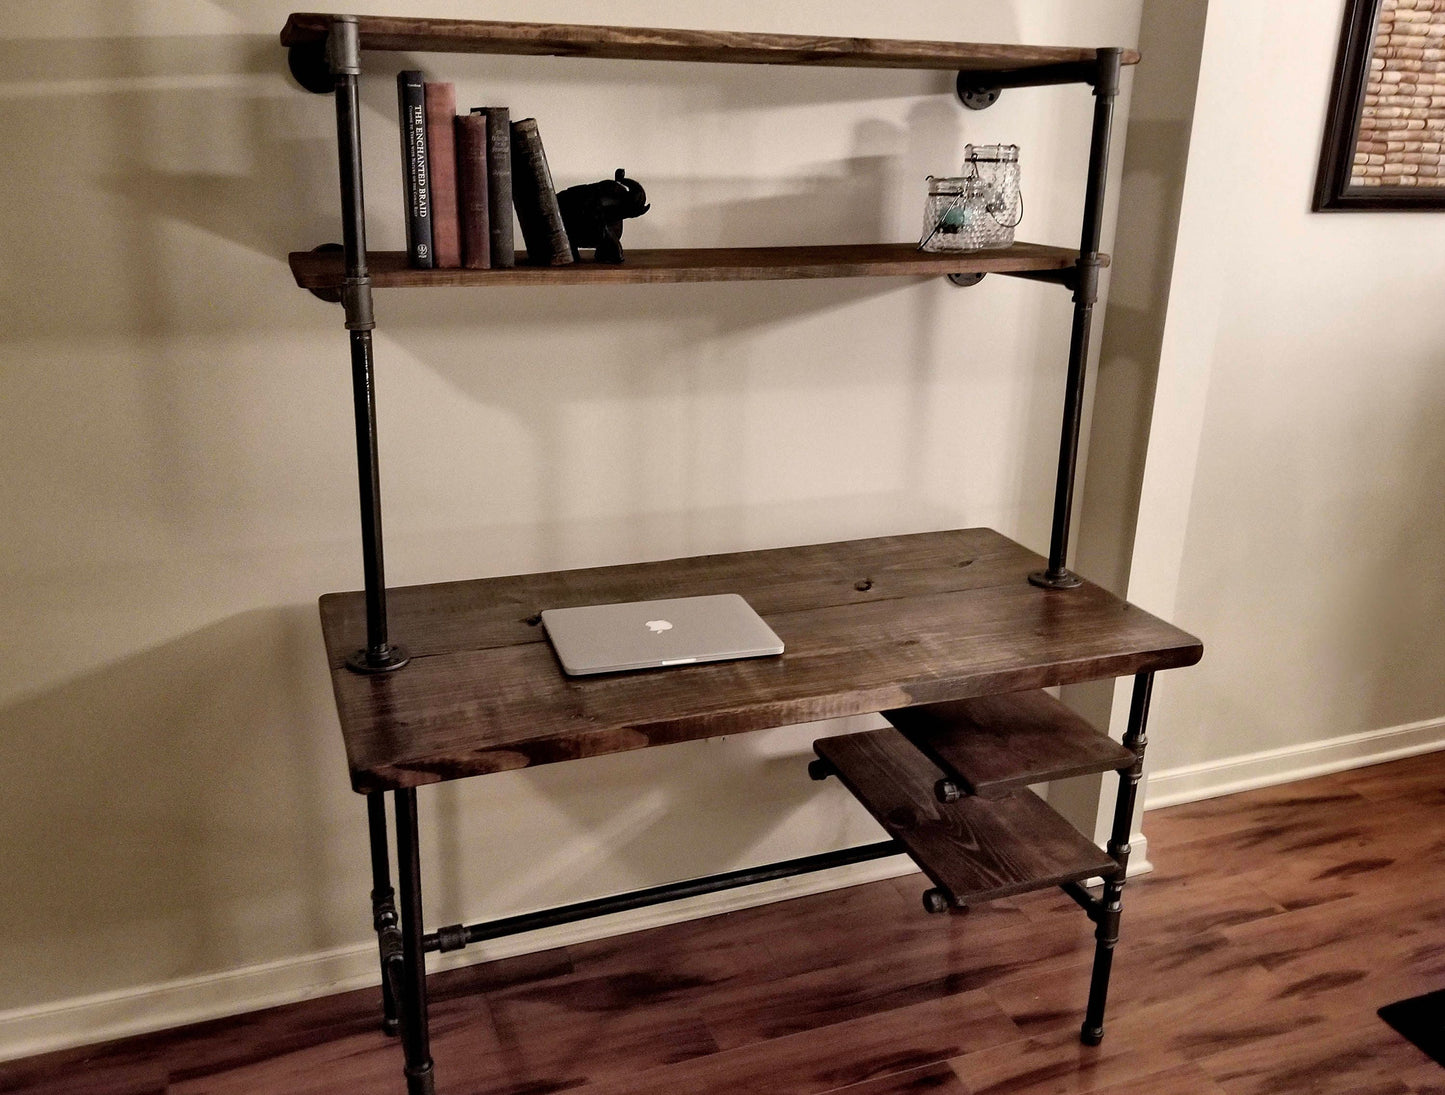 Steel and Wood Desk - Office Iron Pipe Desk with 2 Desk Shelves and 2 Wall Shelves - Multiple Shelf